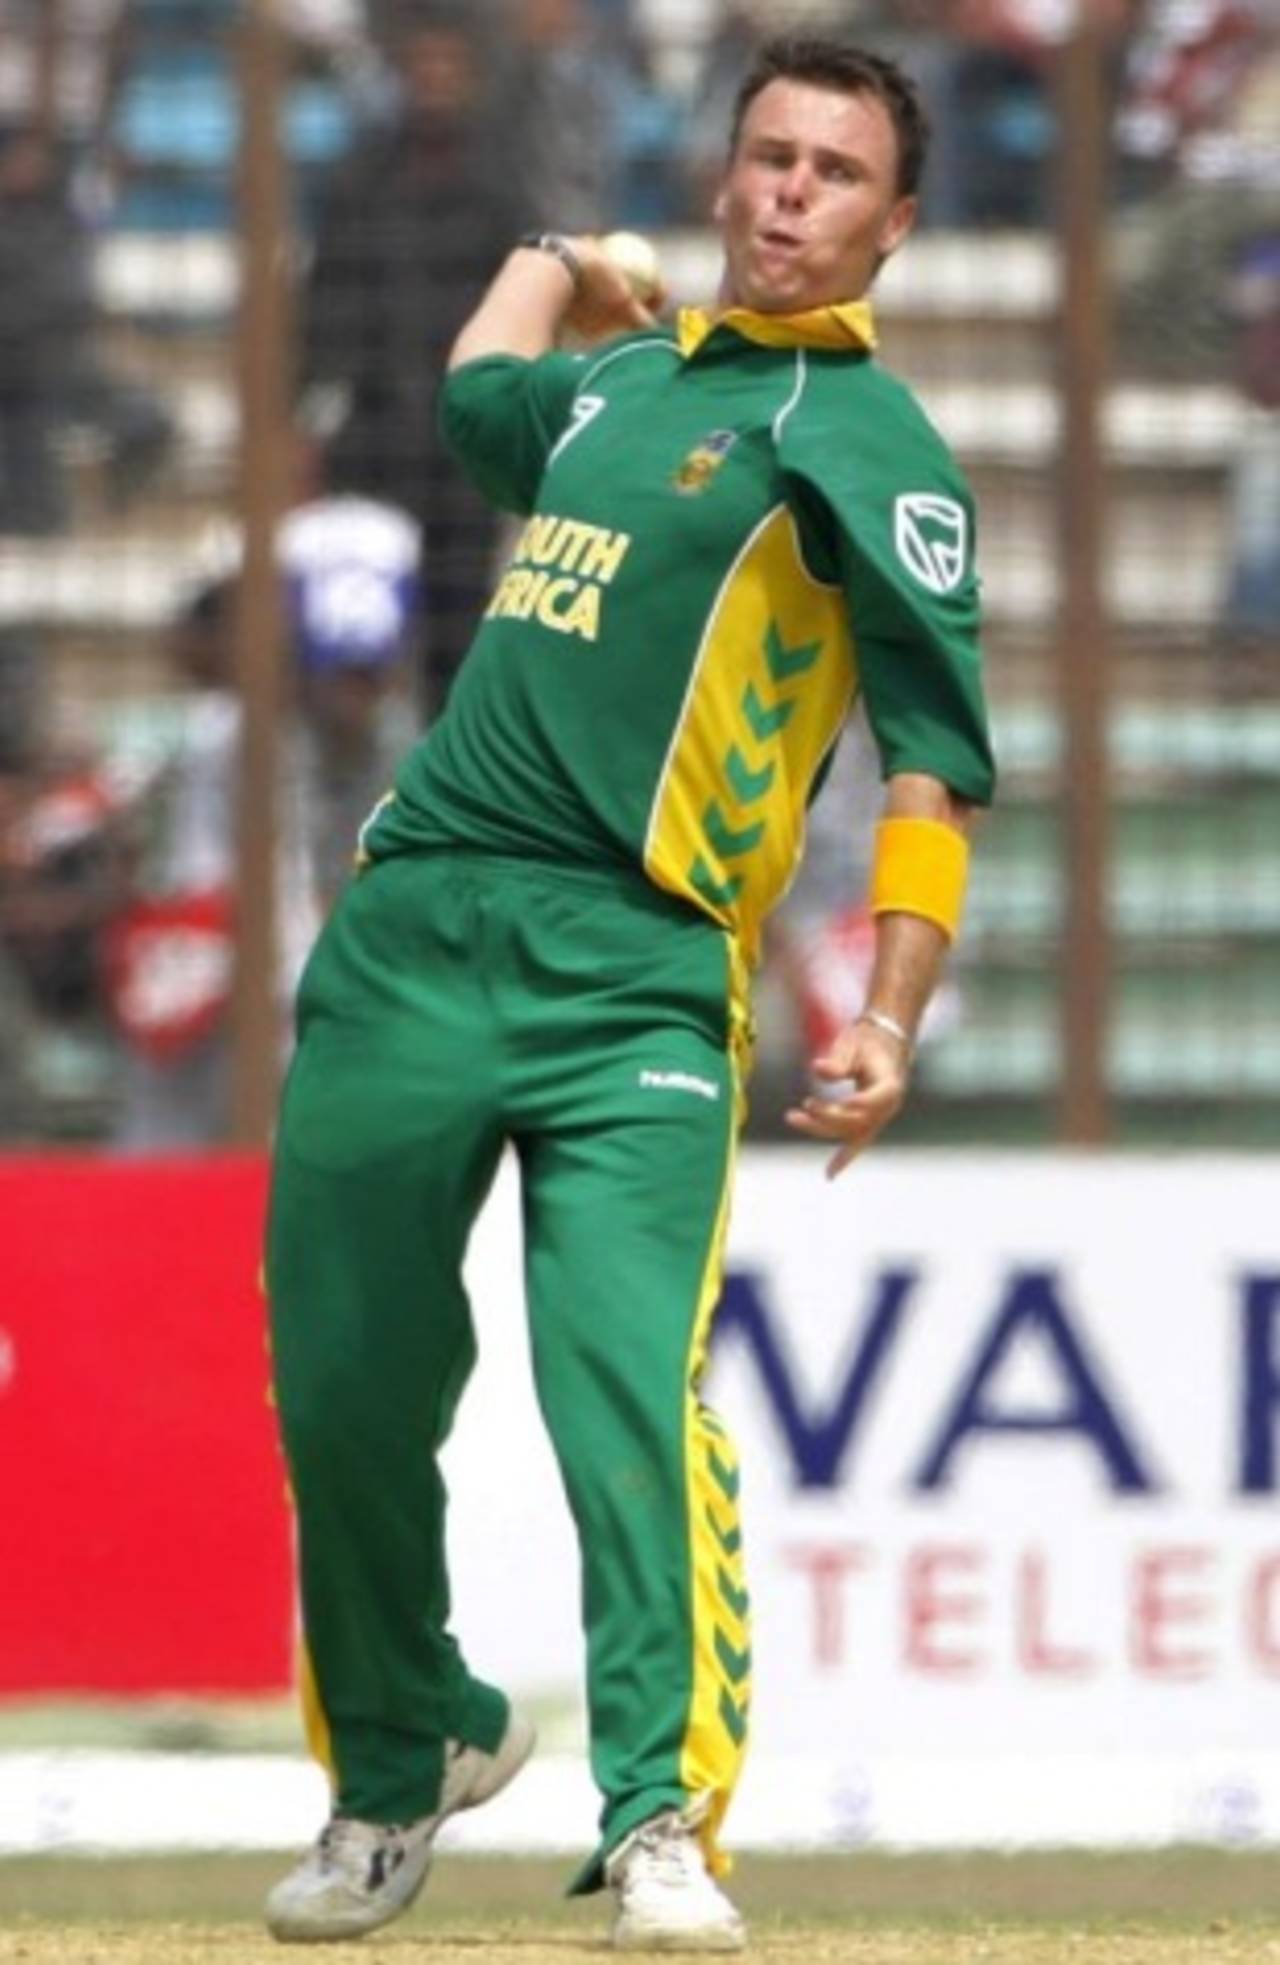 Johan Botha readies to deliver the ball, Bangladesh v South Africa, 1st ODI, Chittagong, March 9, 2008